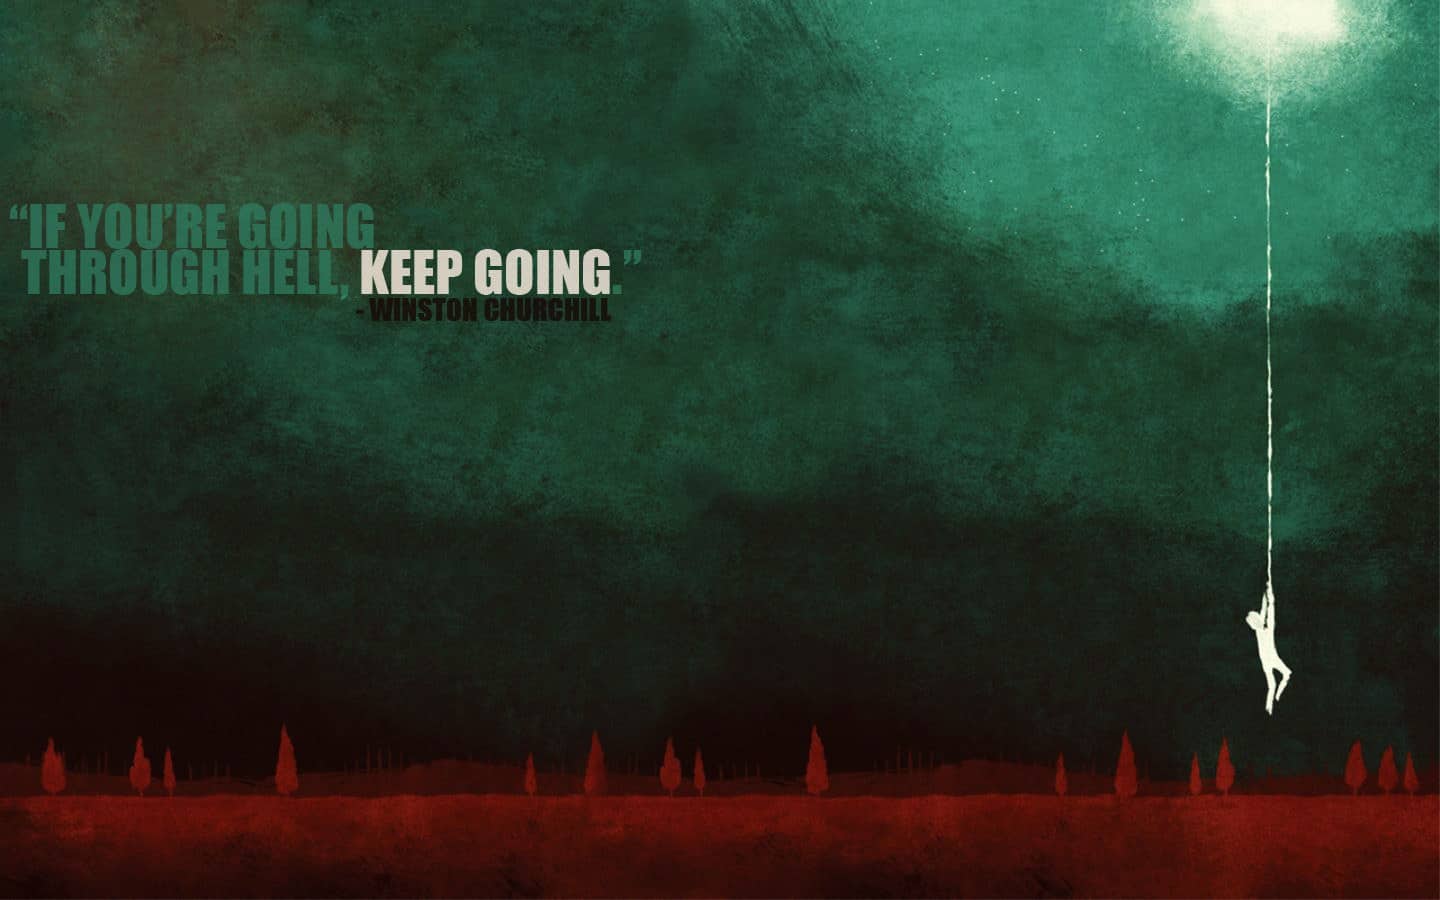 14 Best Motivational Wallpapers For Your Computer Wealthy - If You're Going  Through Hell, Keep Going. - 1440x900 Wallpaper 